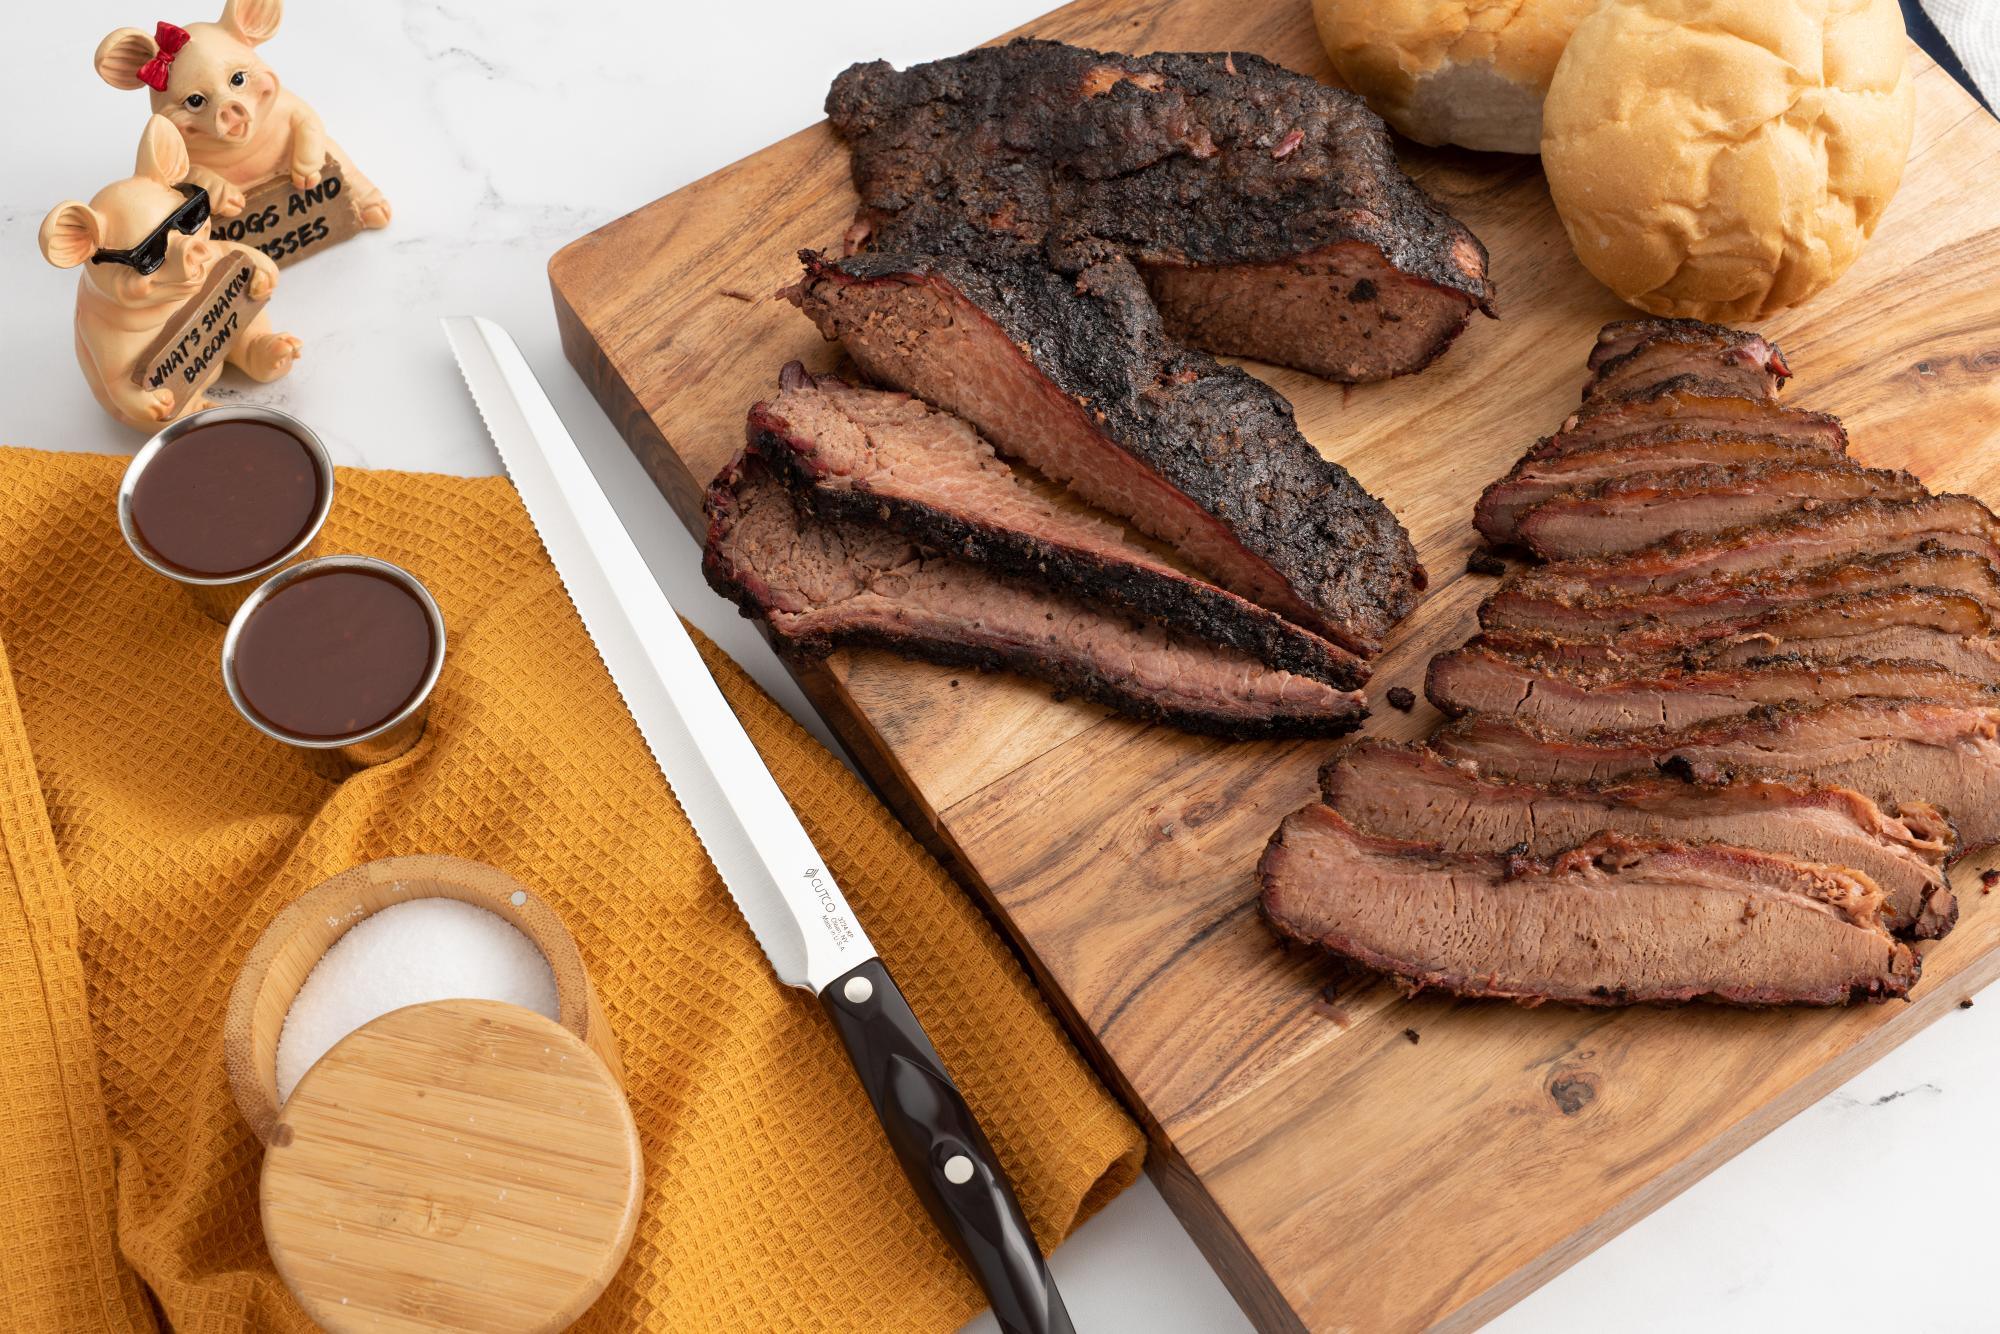 How to Cut Brisket